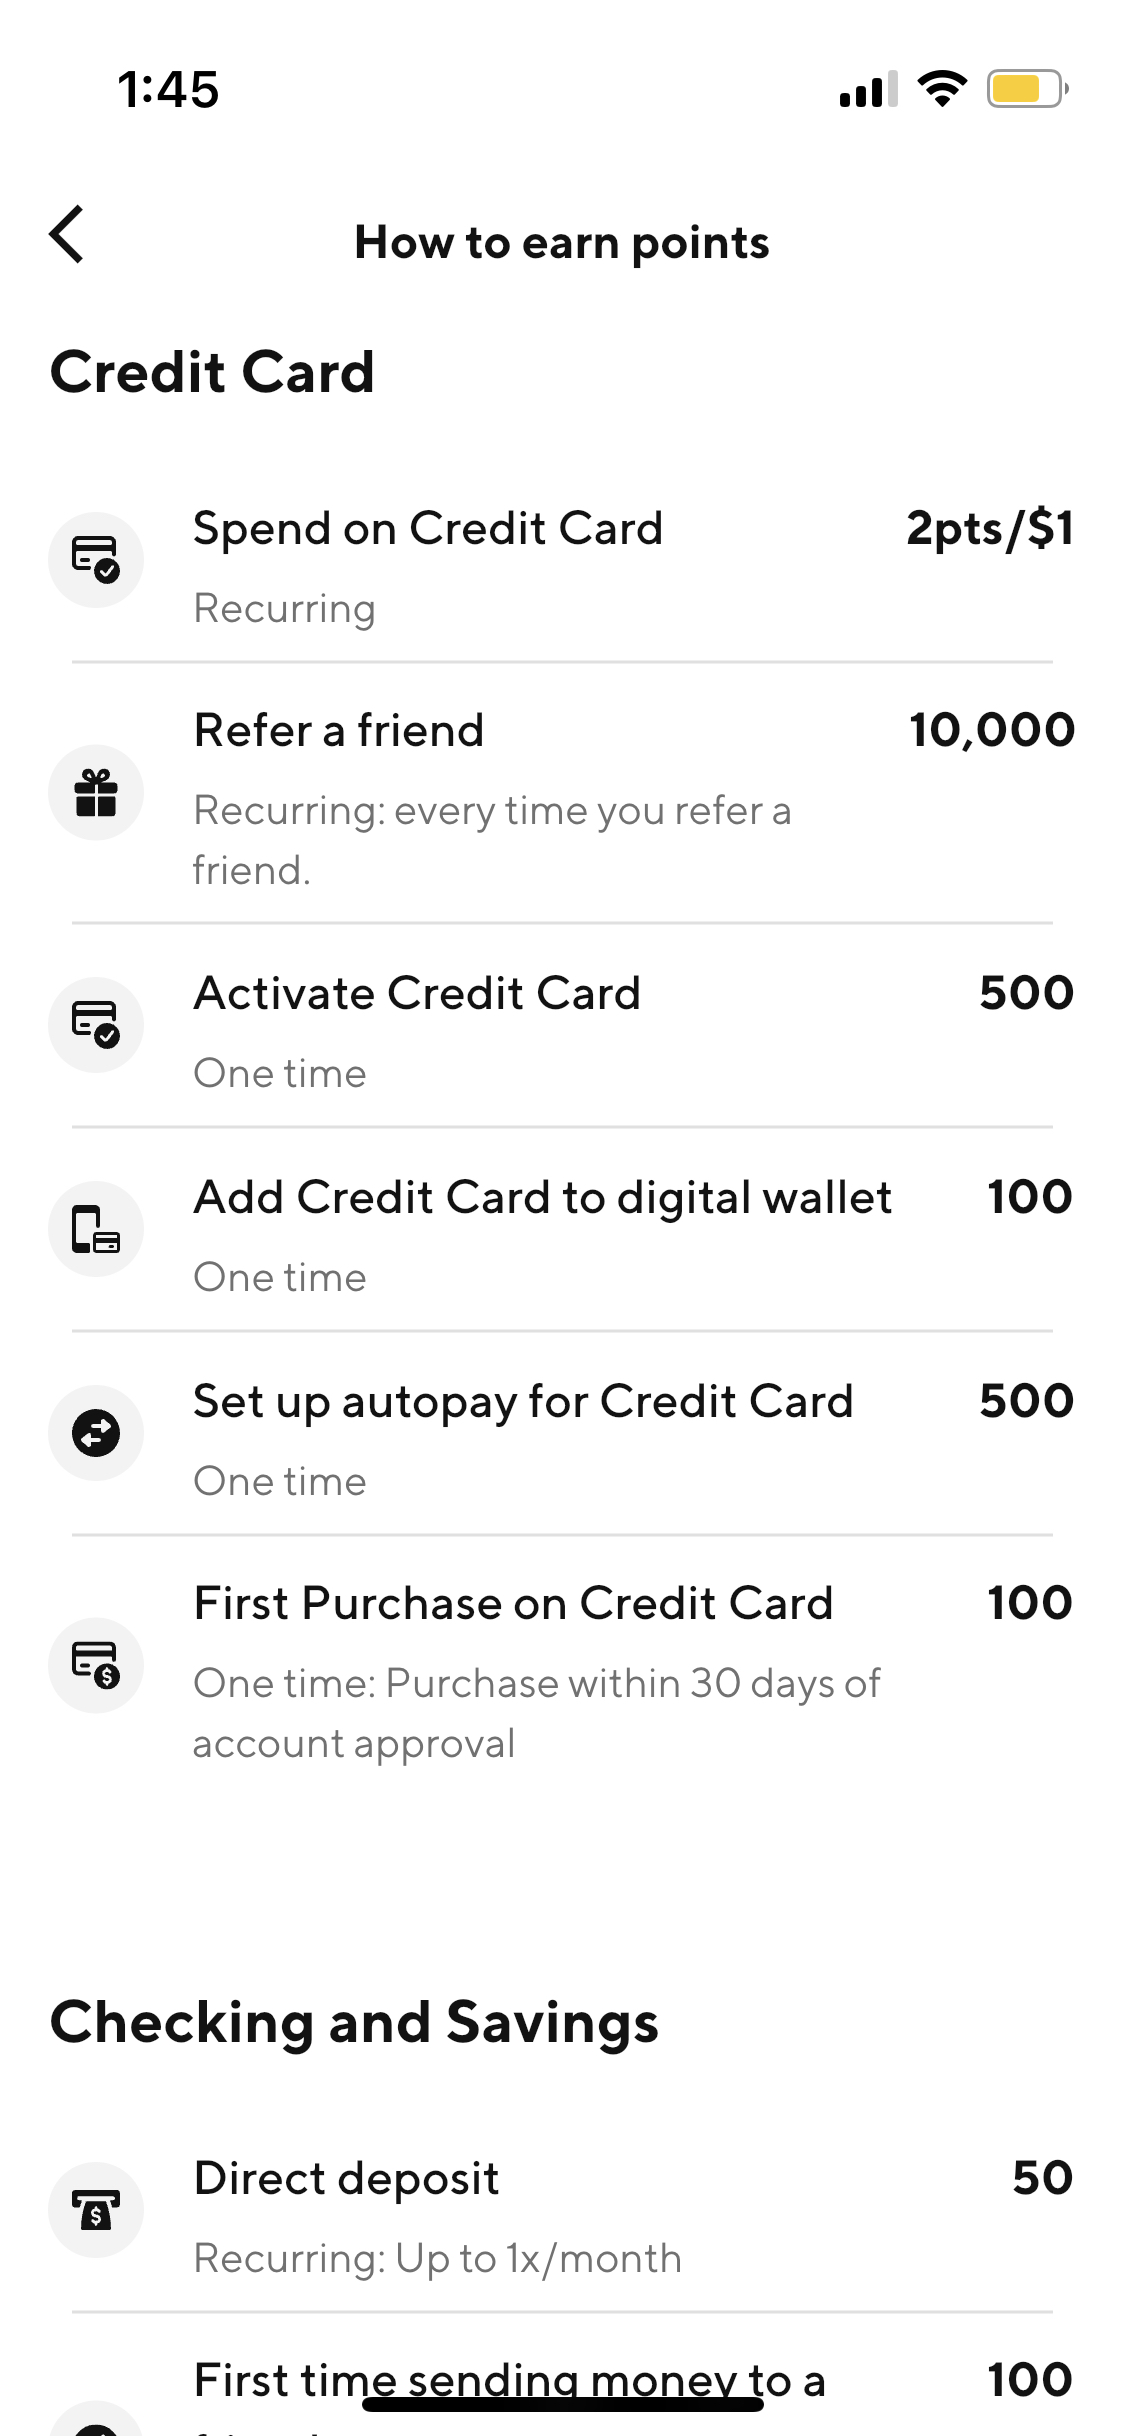 9 Inspiring Rewards Program Examples From B2C FinTech And SaaS Companies